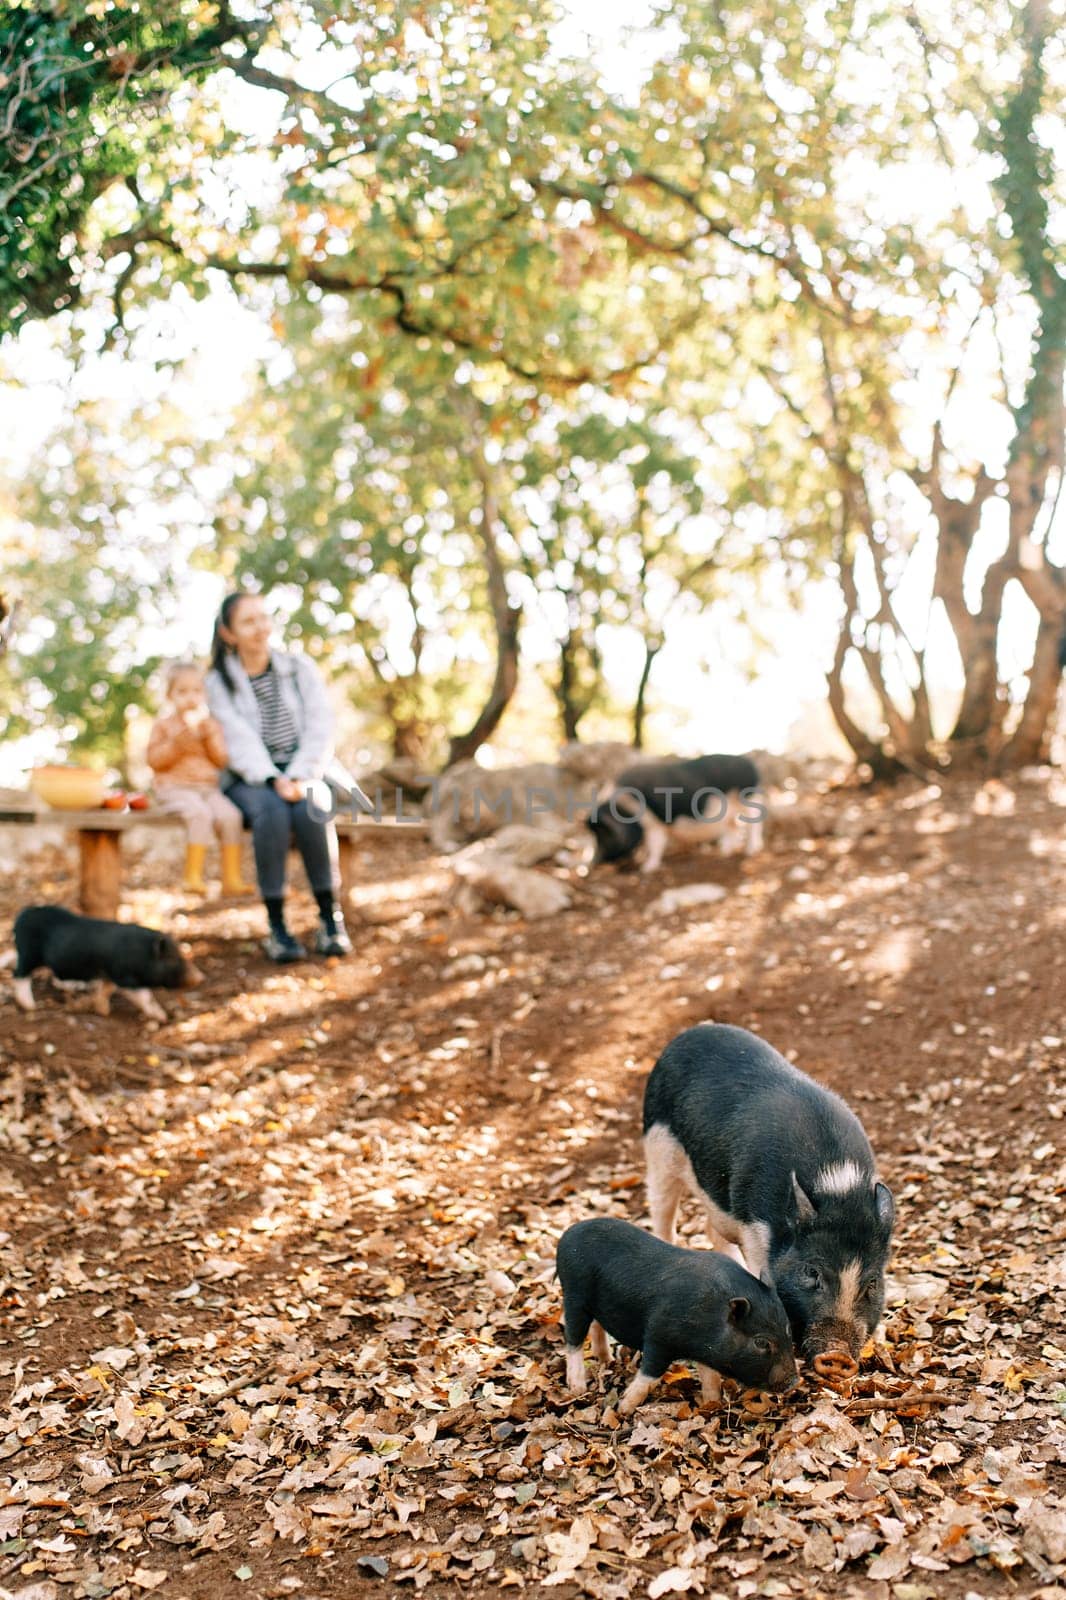 Dwarf pig and a piglet graze in an autumn park against the backdrop of a mother and a little girl sitting on a bench. High quality photo